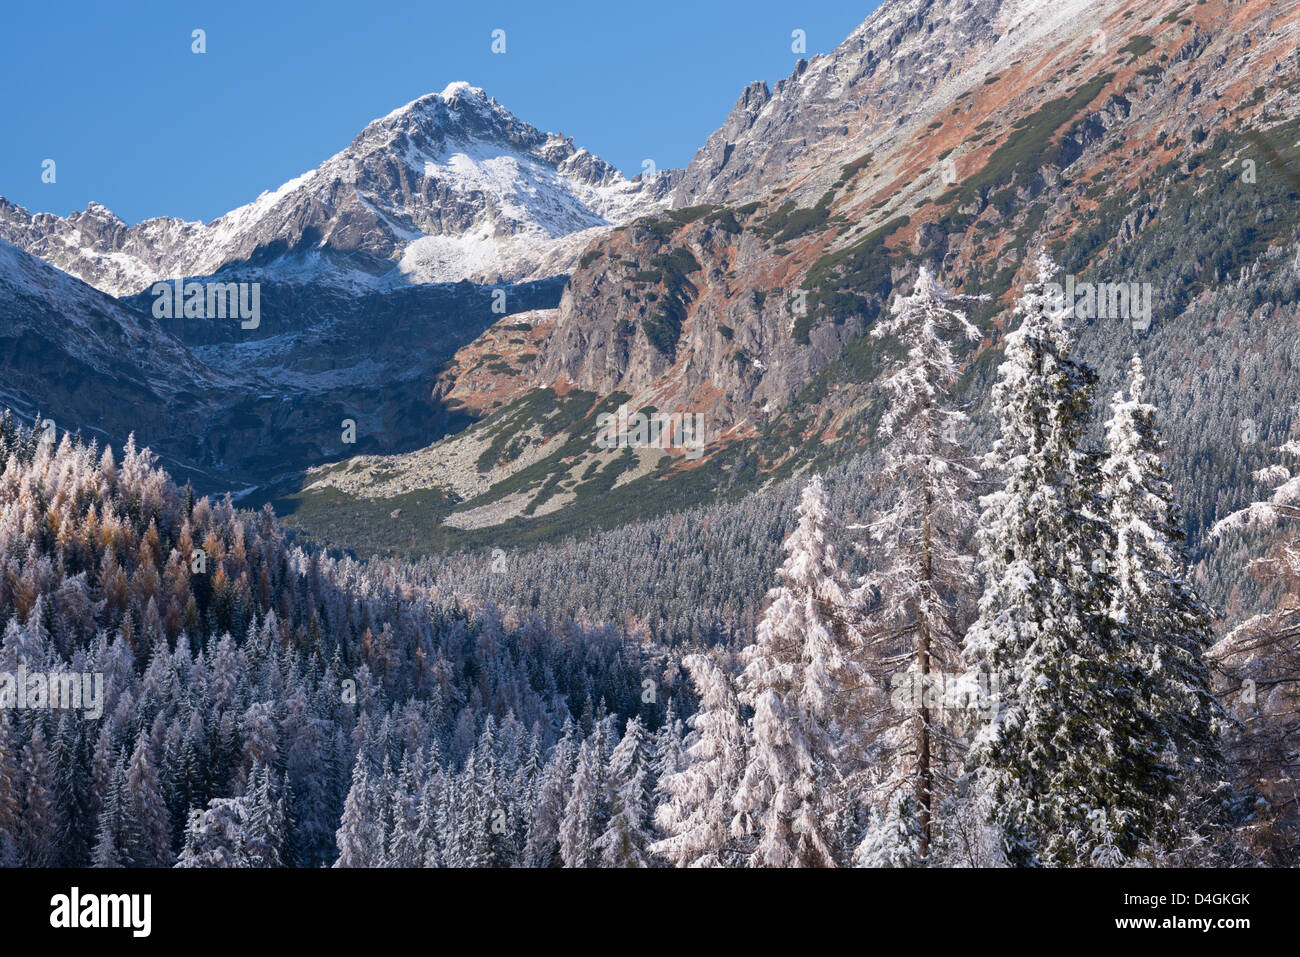 Snow dusted mountains and pine forests of the High Tatras, Slovakia, Europe. Autumn (October) 2012. Stock Photo